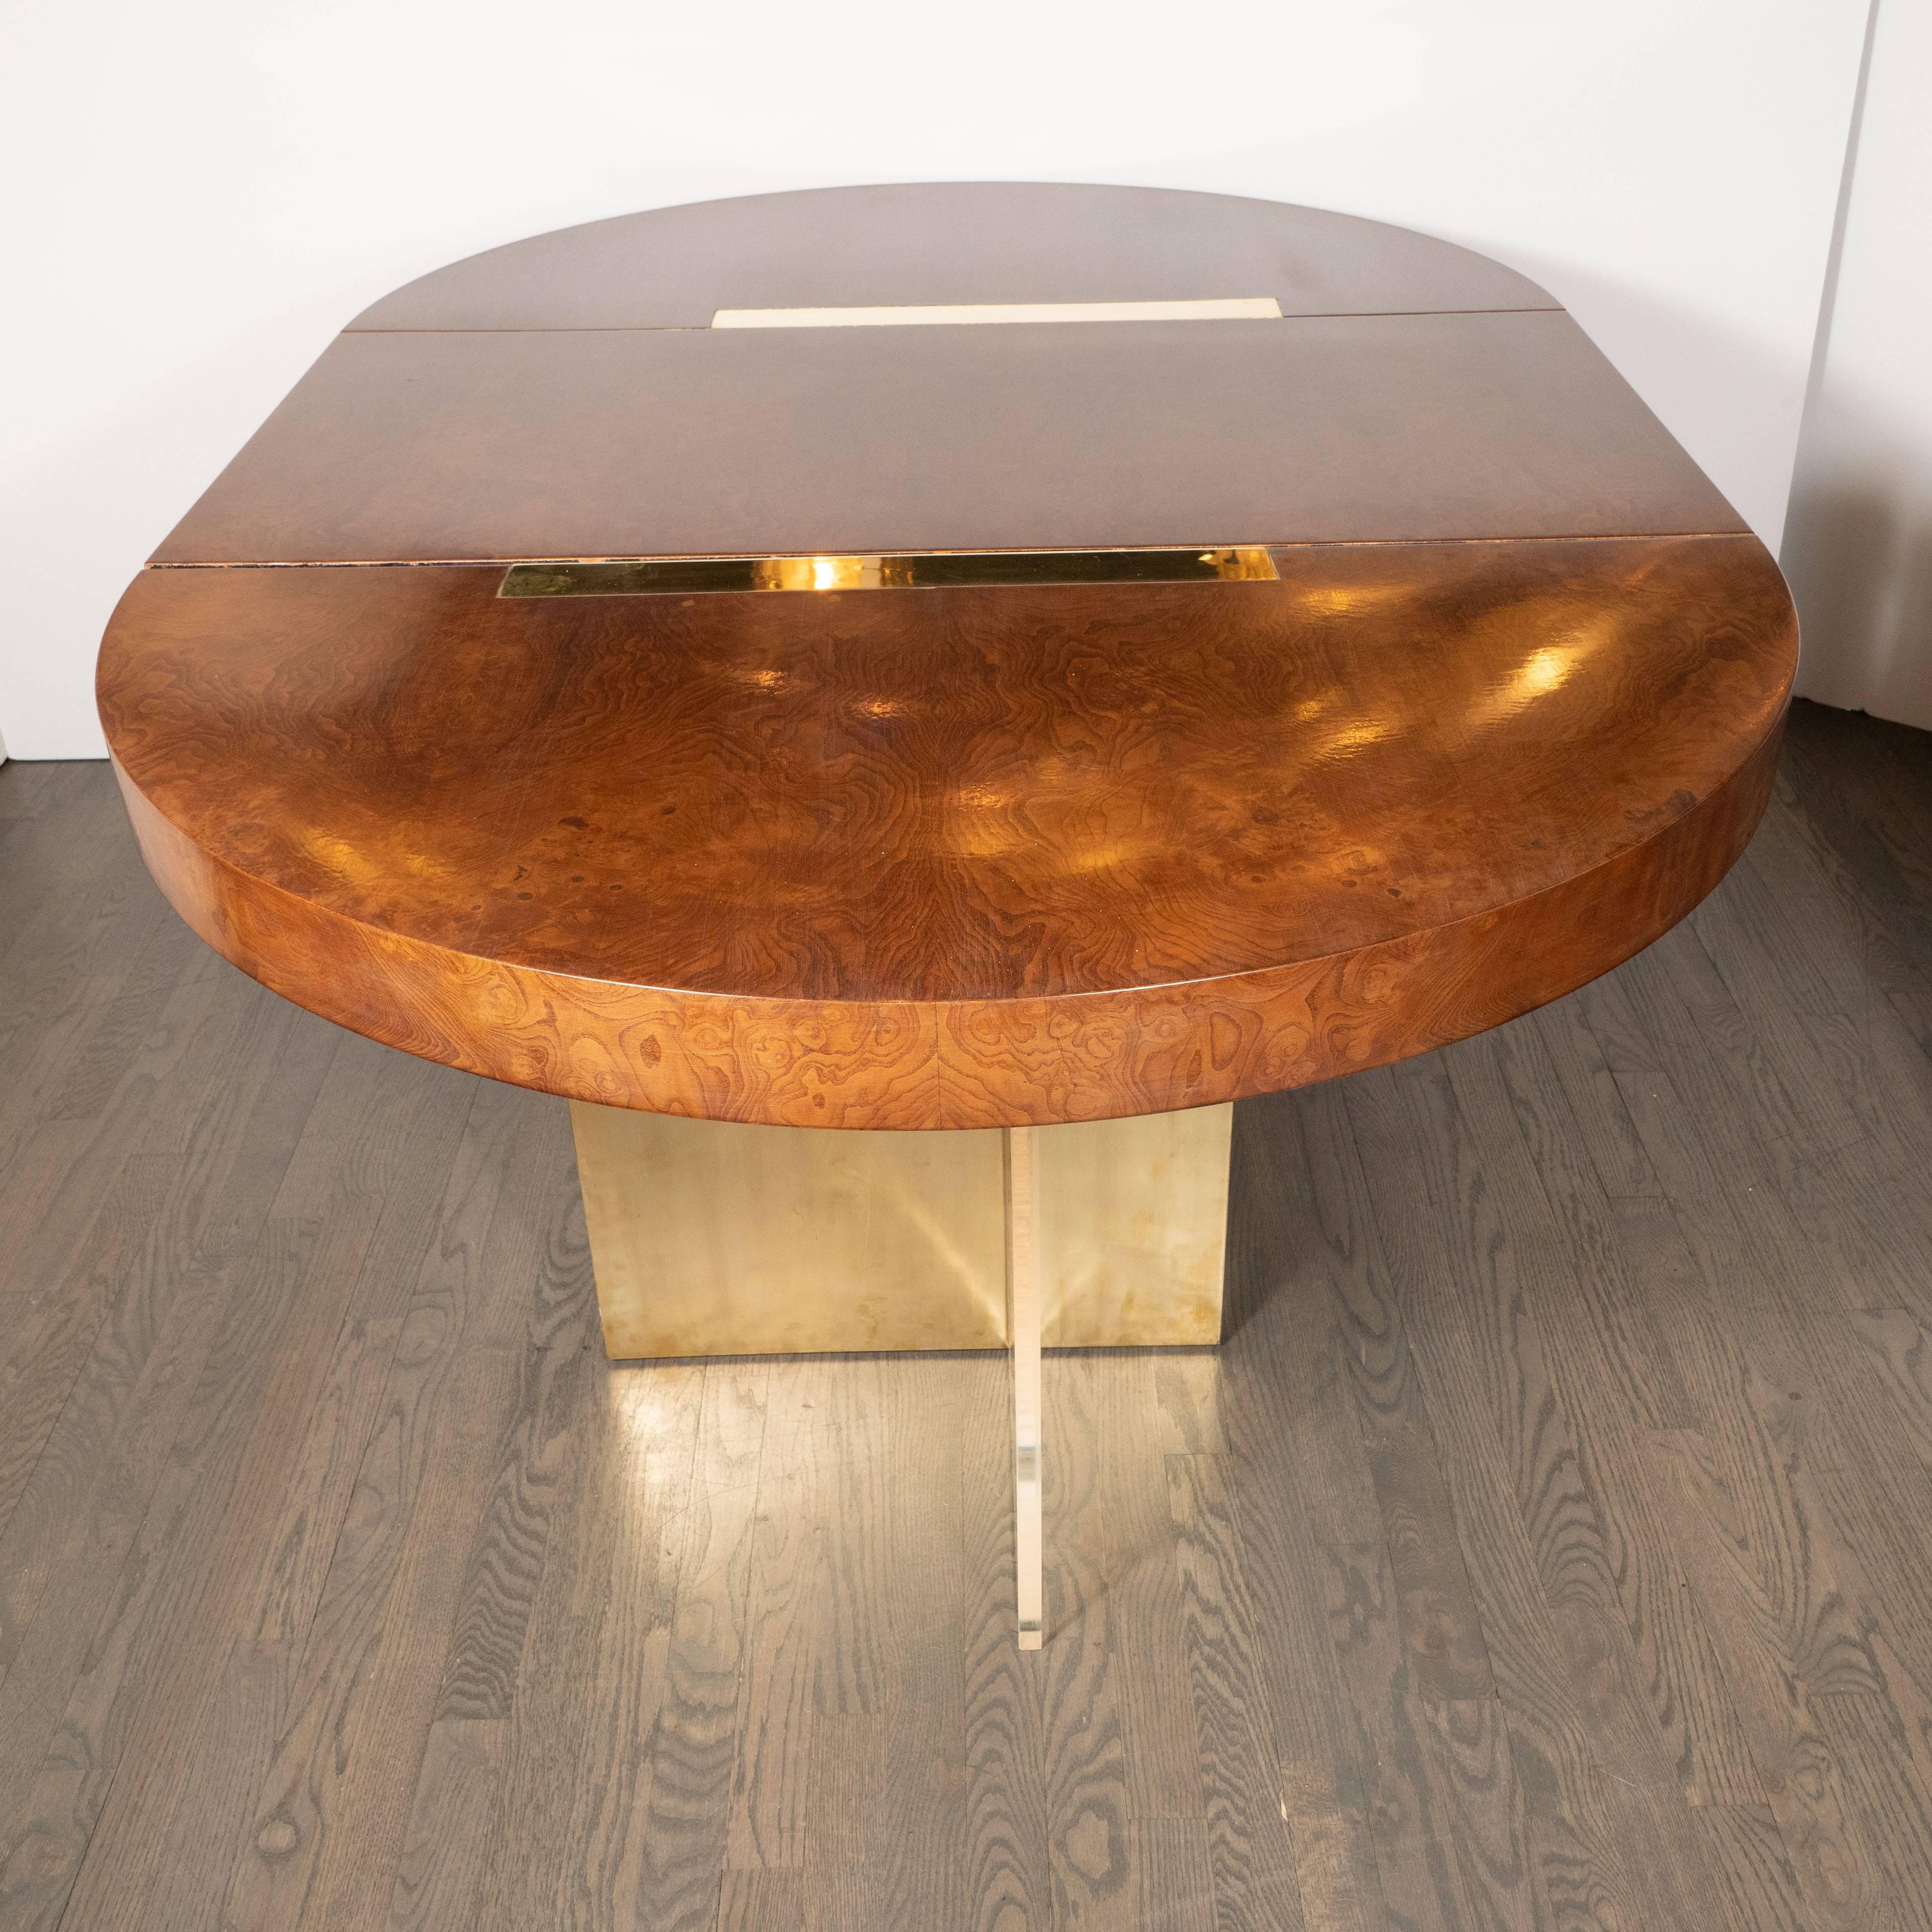 American Midcentury Burled Ash, Brass and Lucite Center/Dining Table by Vladimir Kagan